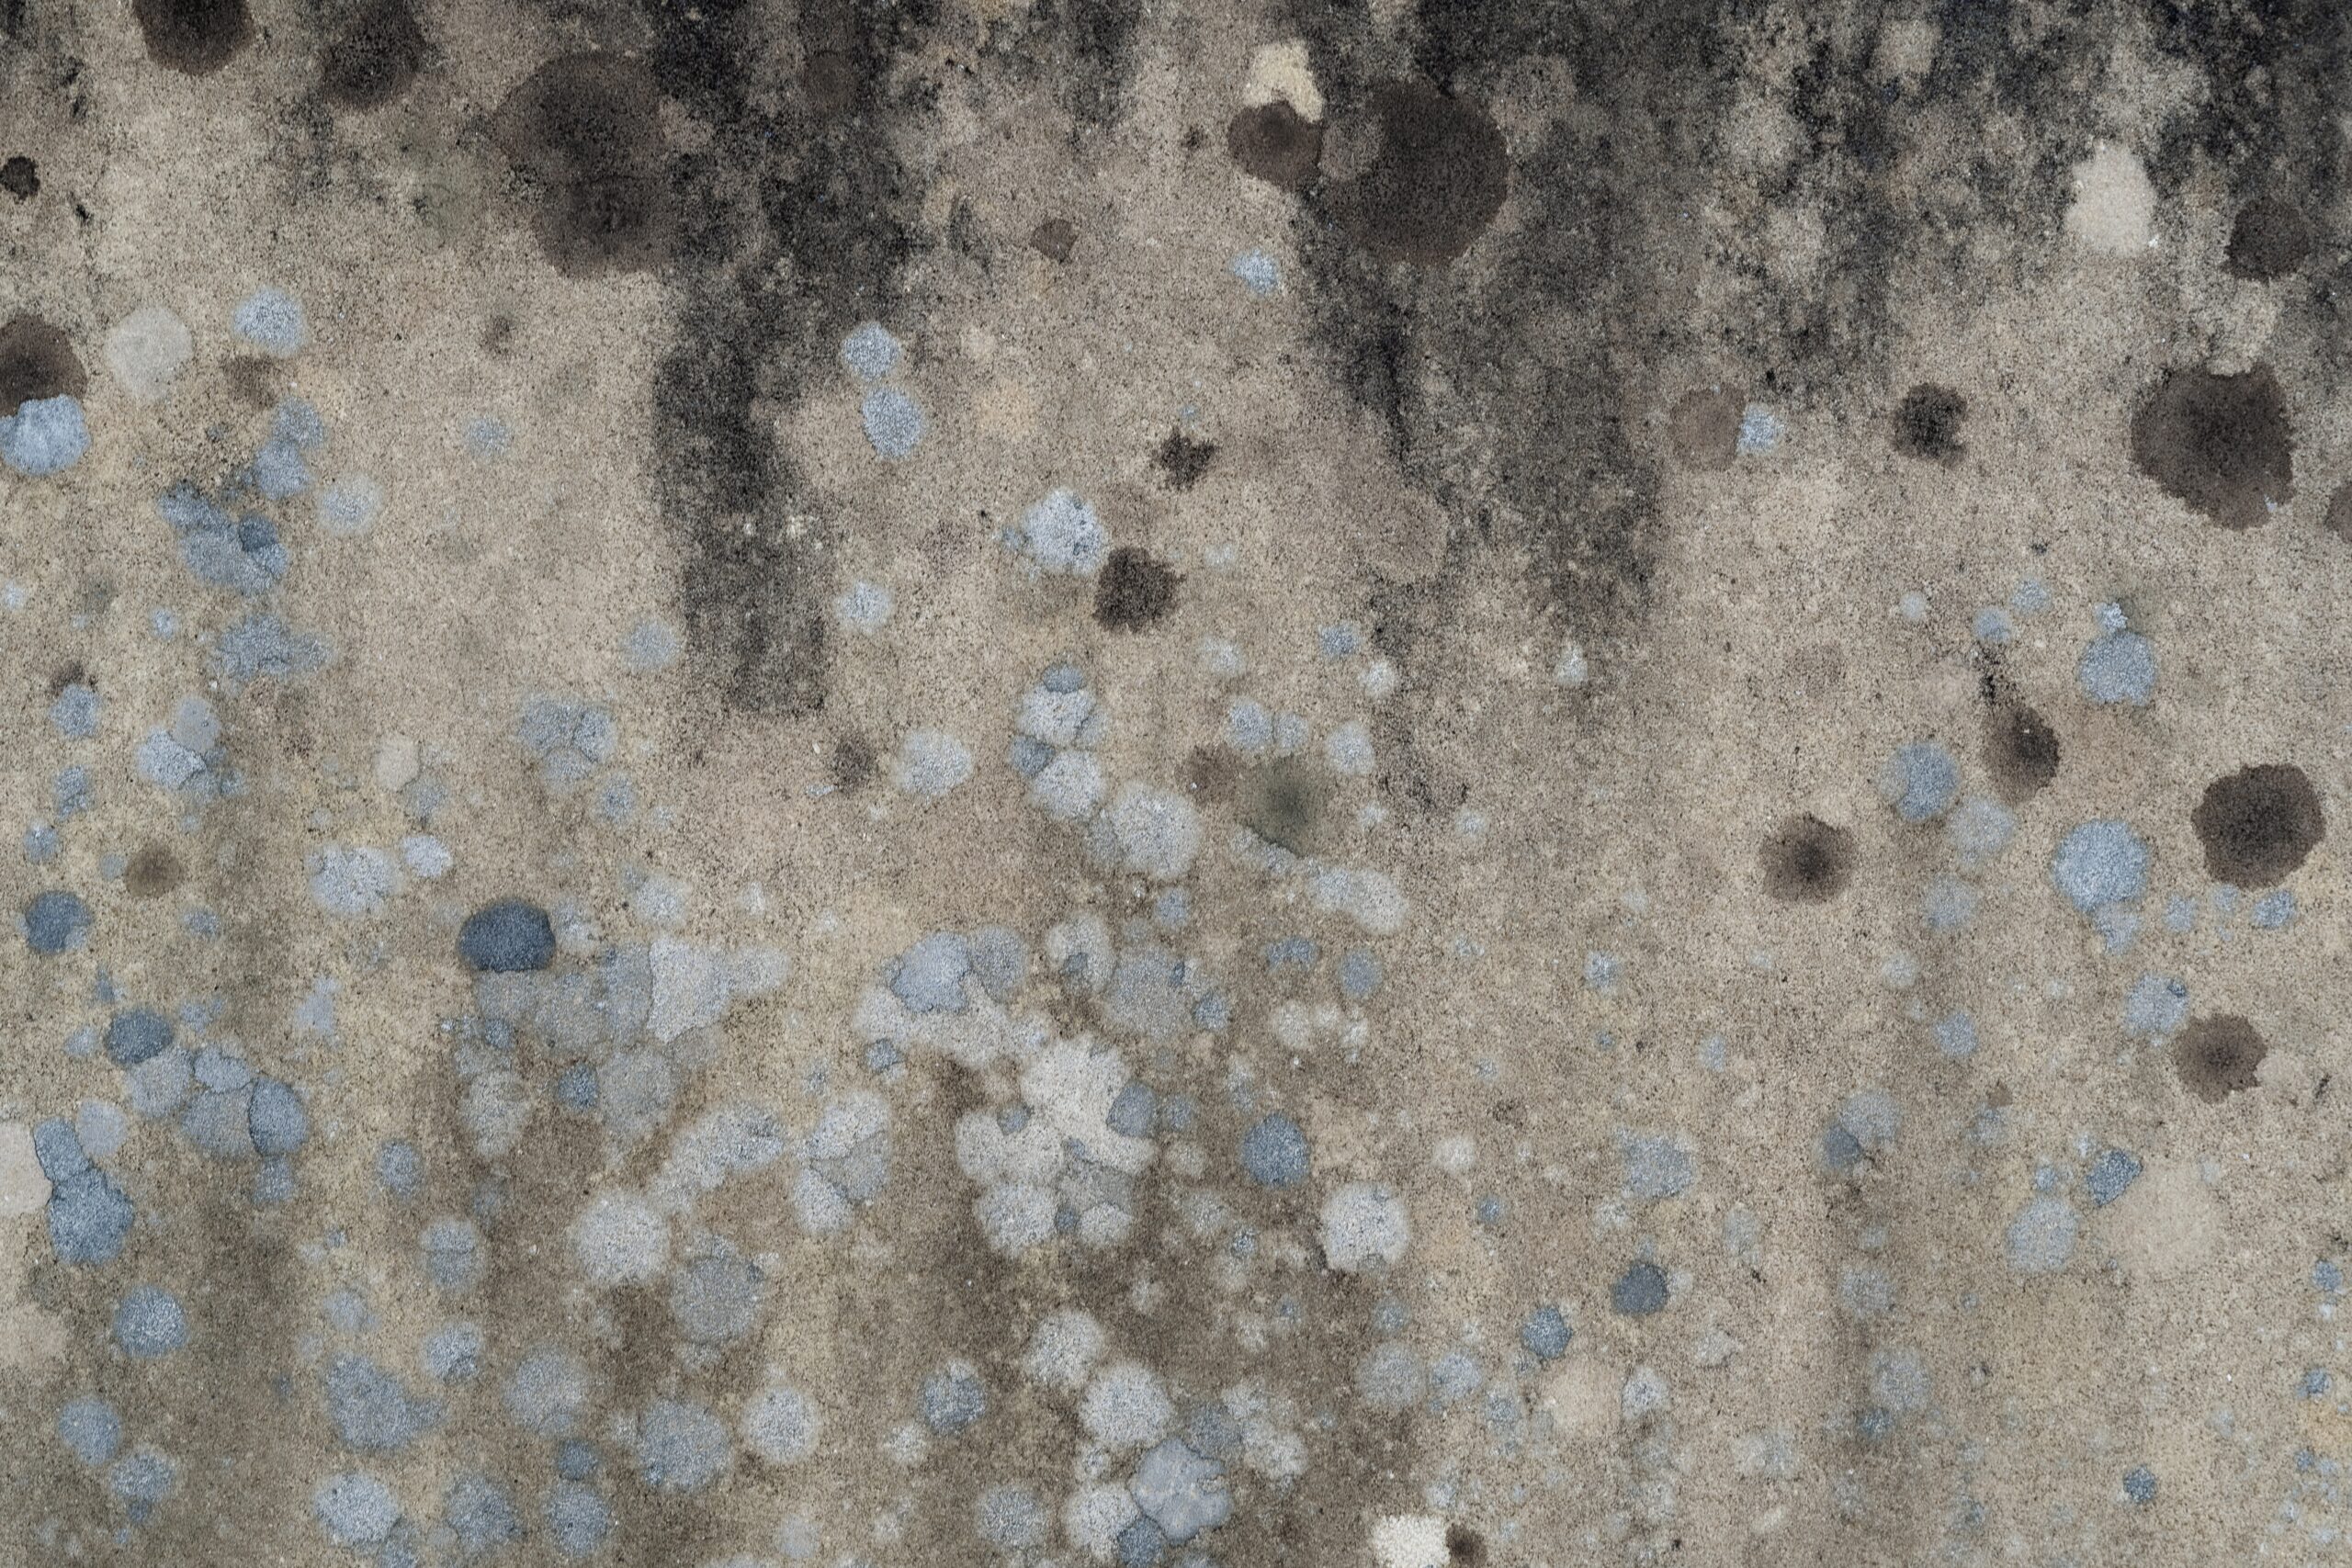 Mold toxicity and exposure is a common household problem now, and no matter how clean your house is, it can still take over small and forgotten areas. Pictured: Mold on a granite wall.